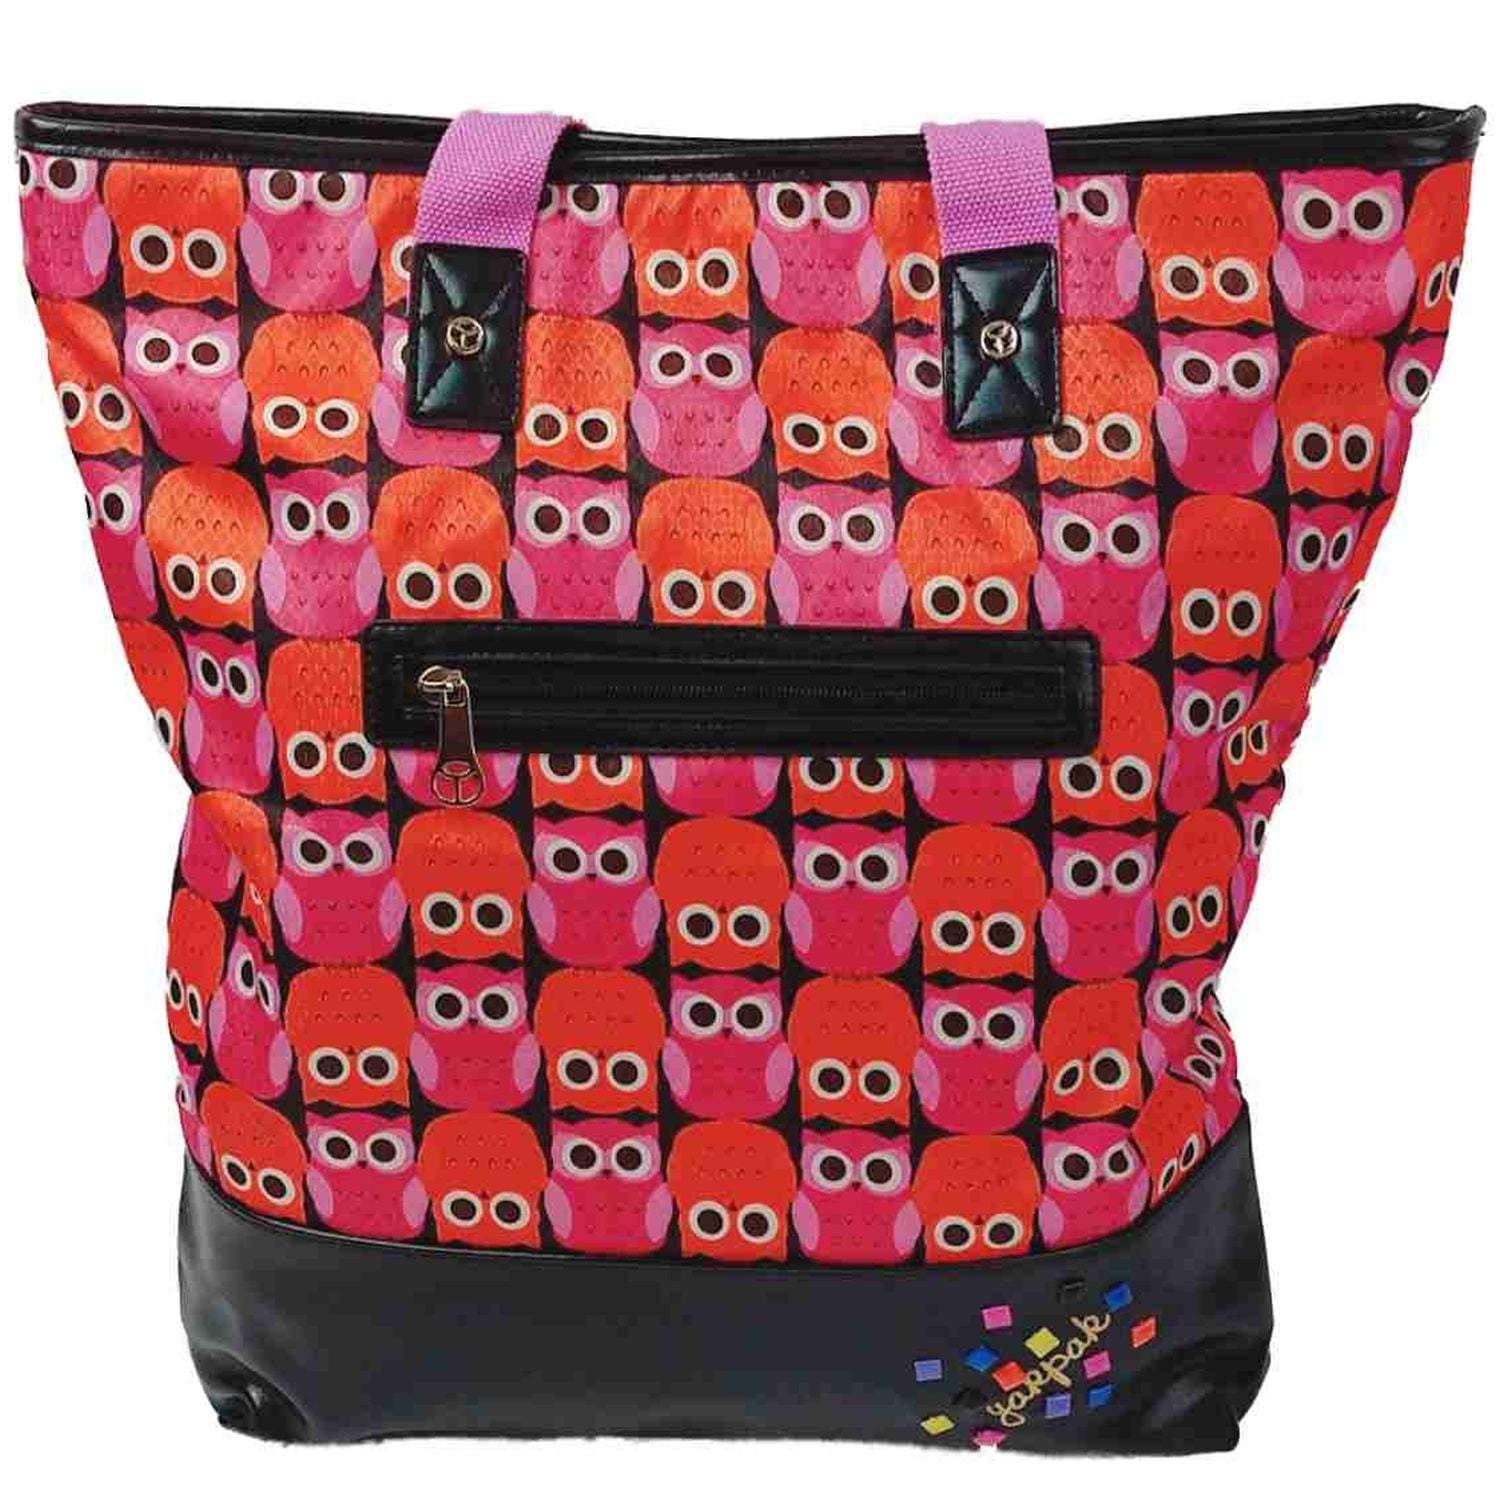 Owl Tote Bags - Tribal Print Owl Tote Bags from Groove Bags